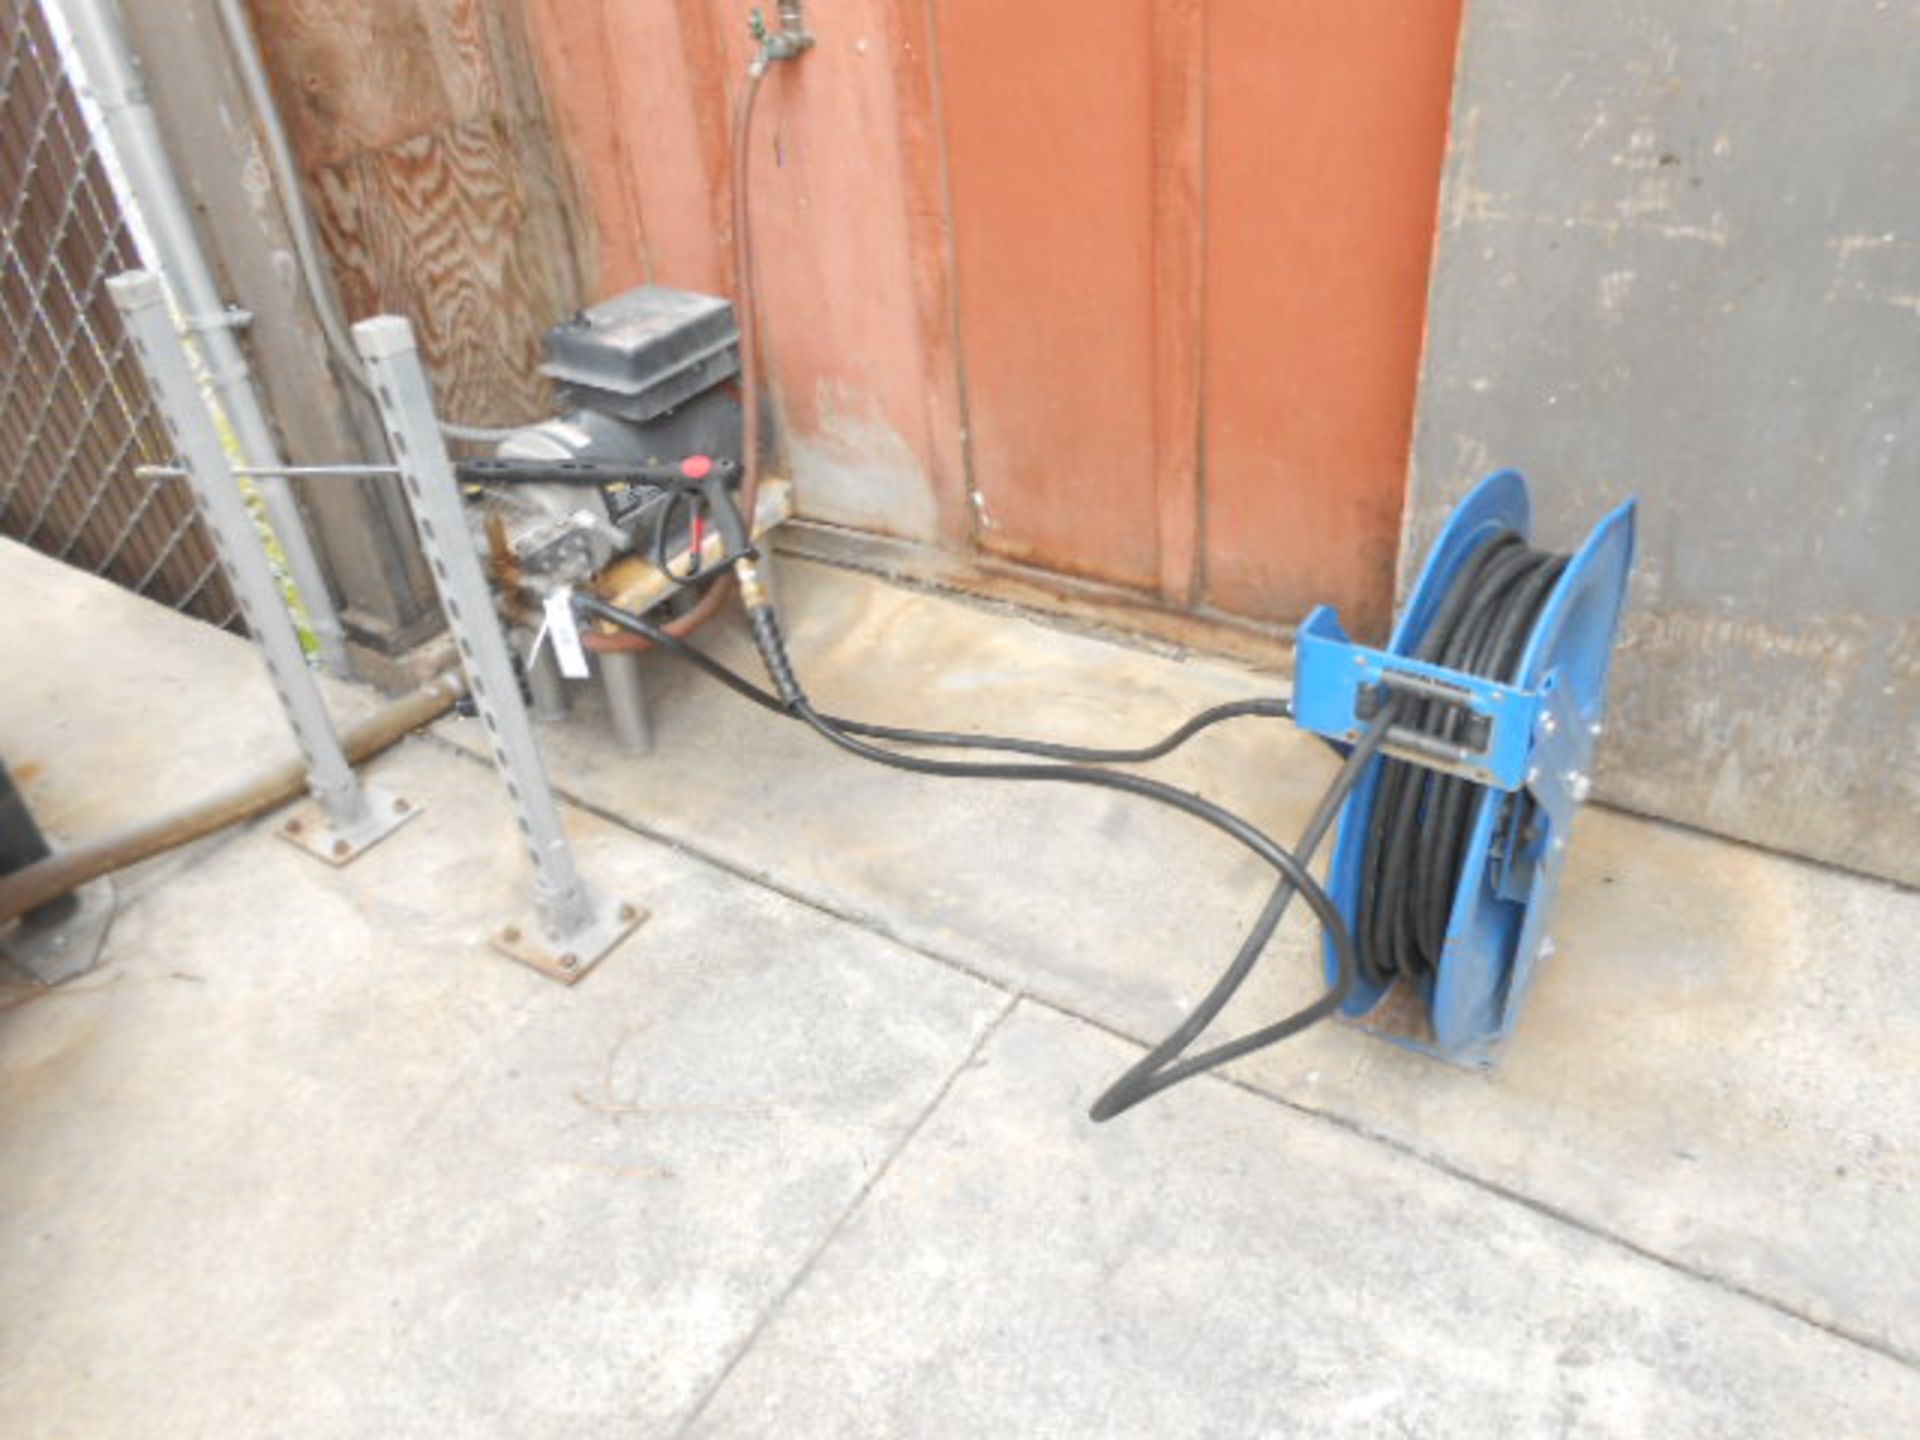 Mit-T-M power washer with electric 6 hp motor __LOCATED: OUTSIDE CELLAR AREA ***